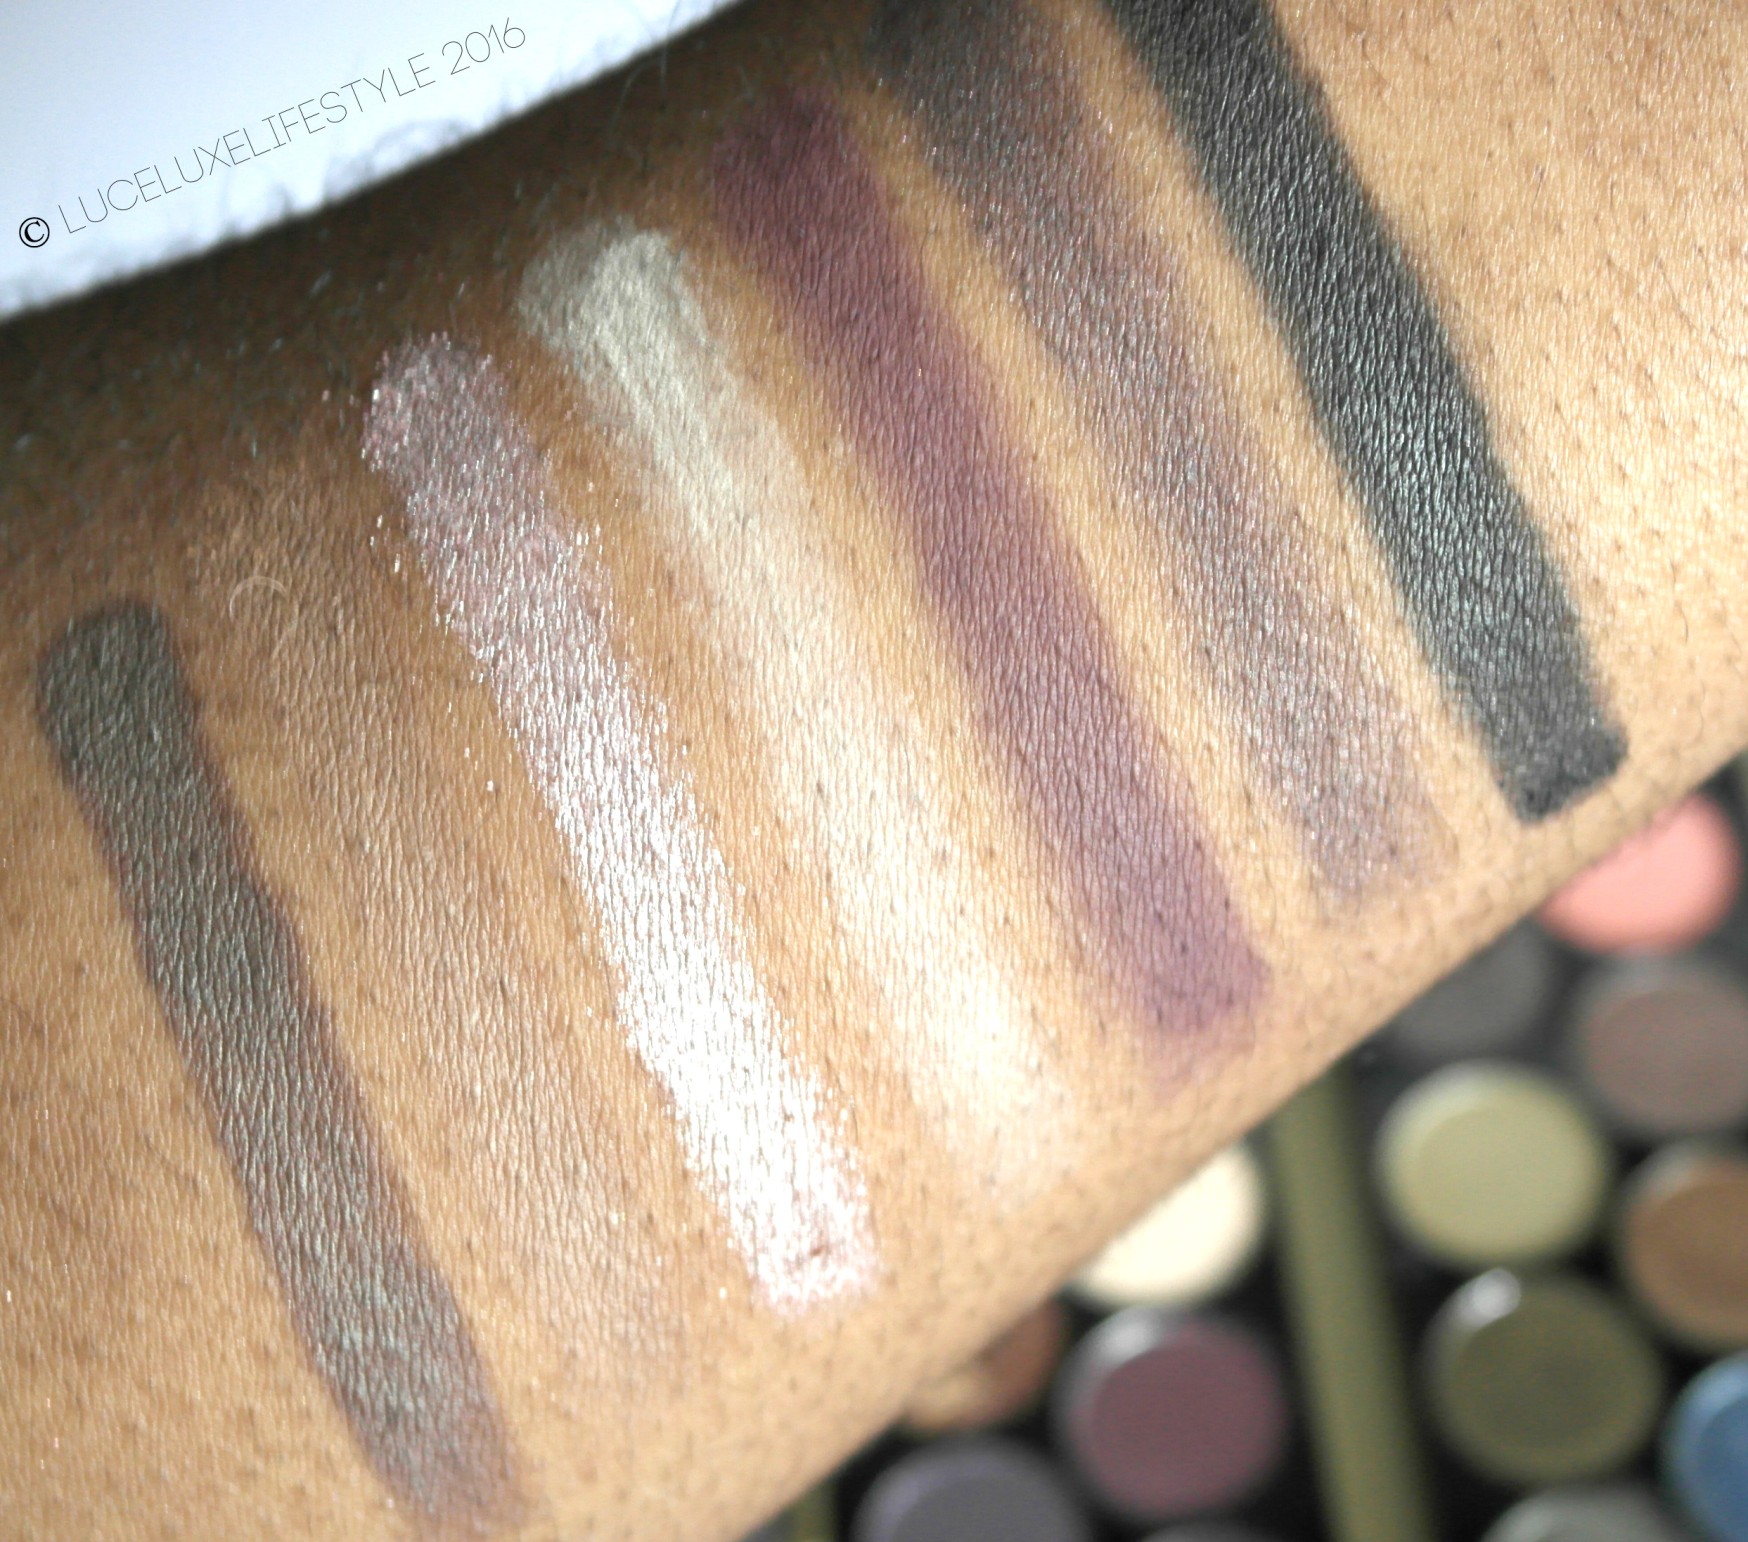 fortune favours the brave makeup revolution swatch 3.jpg